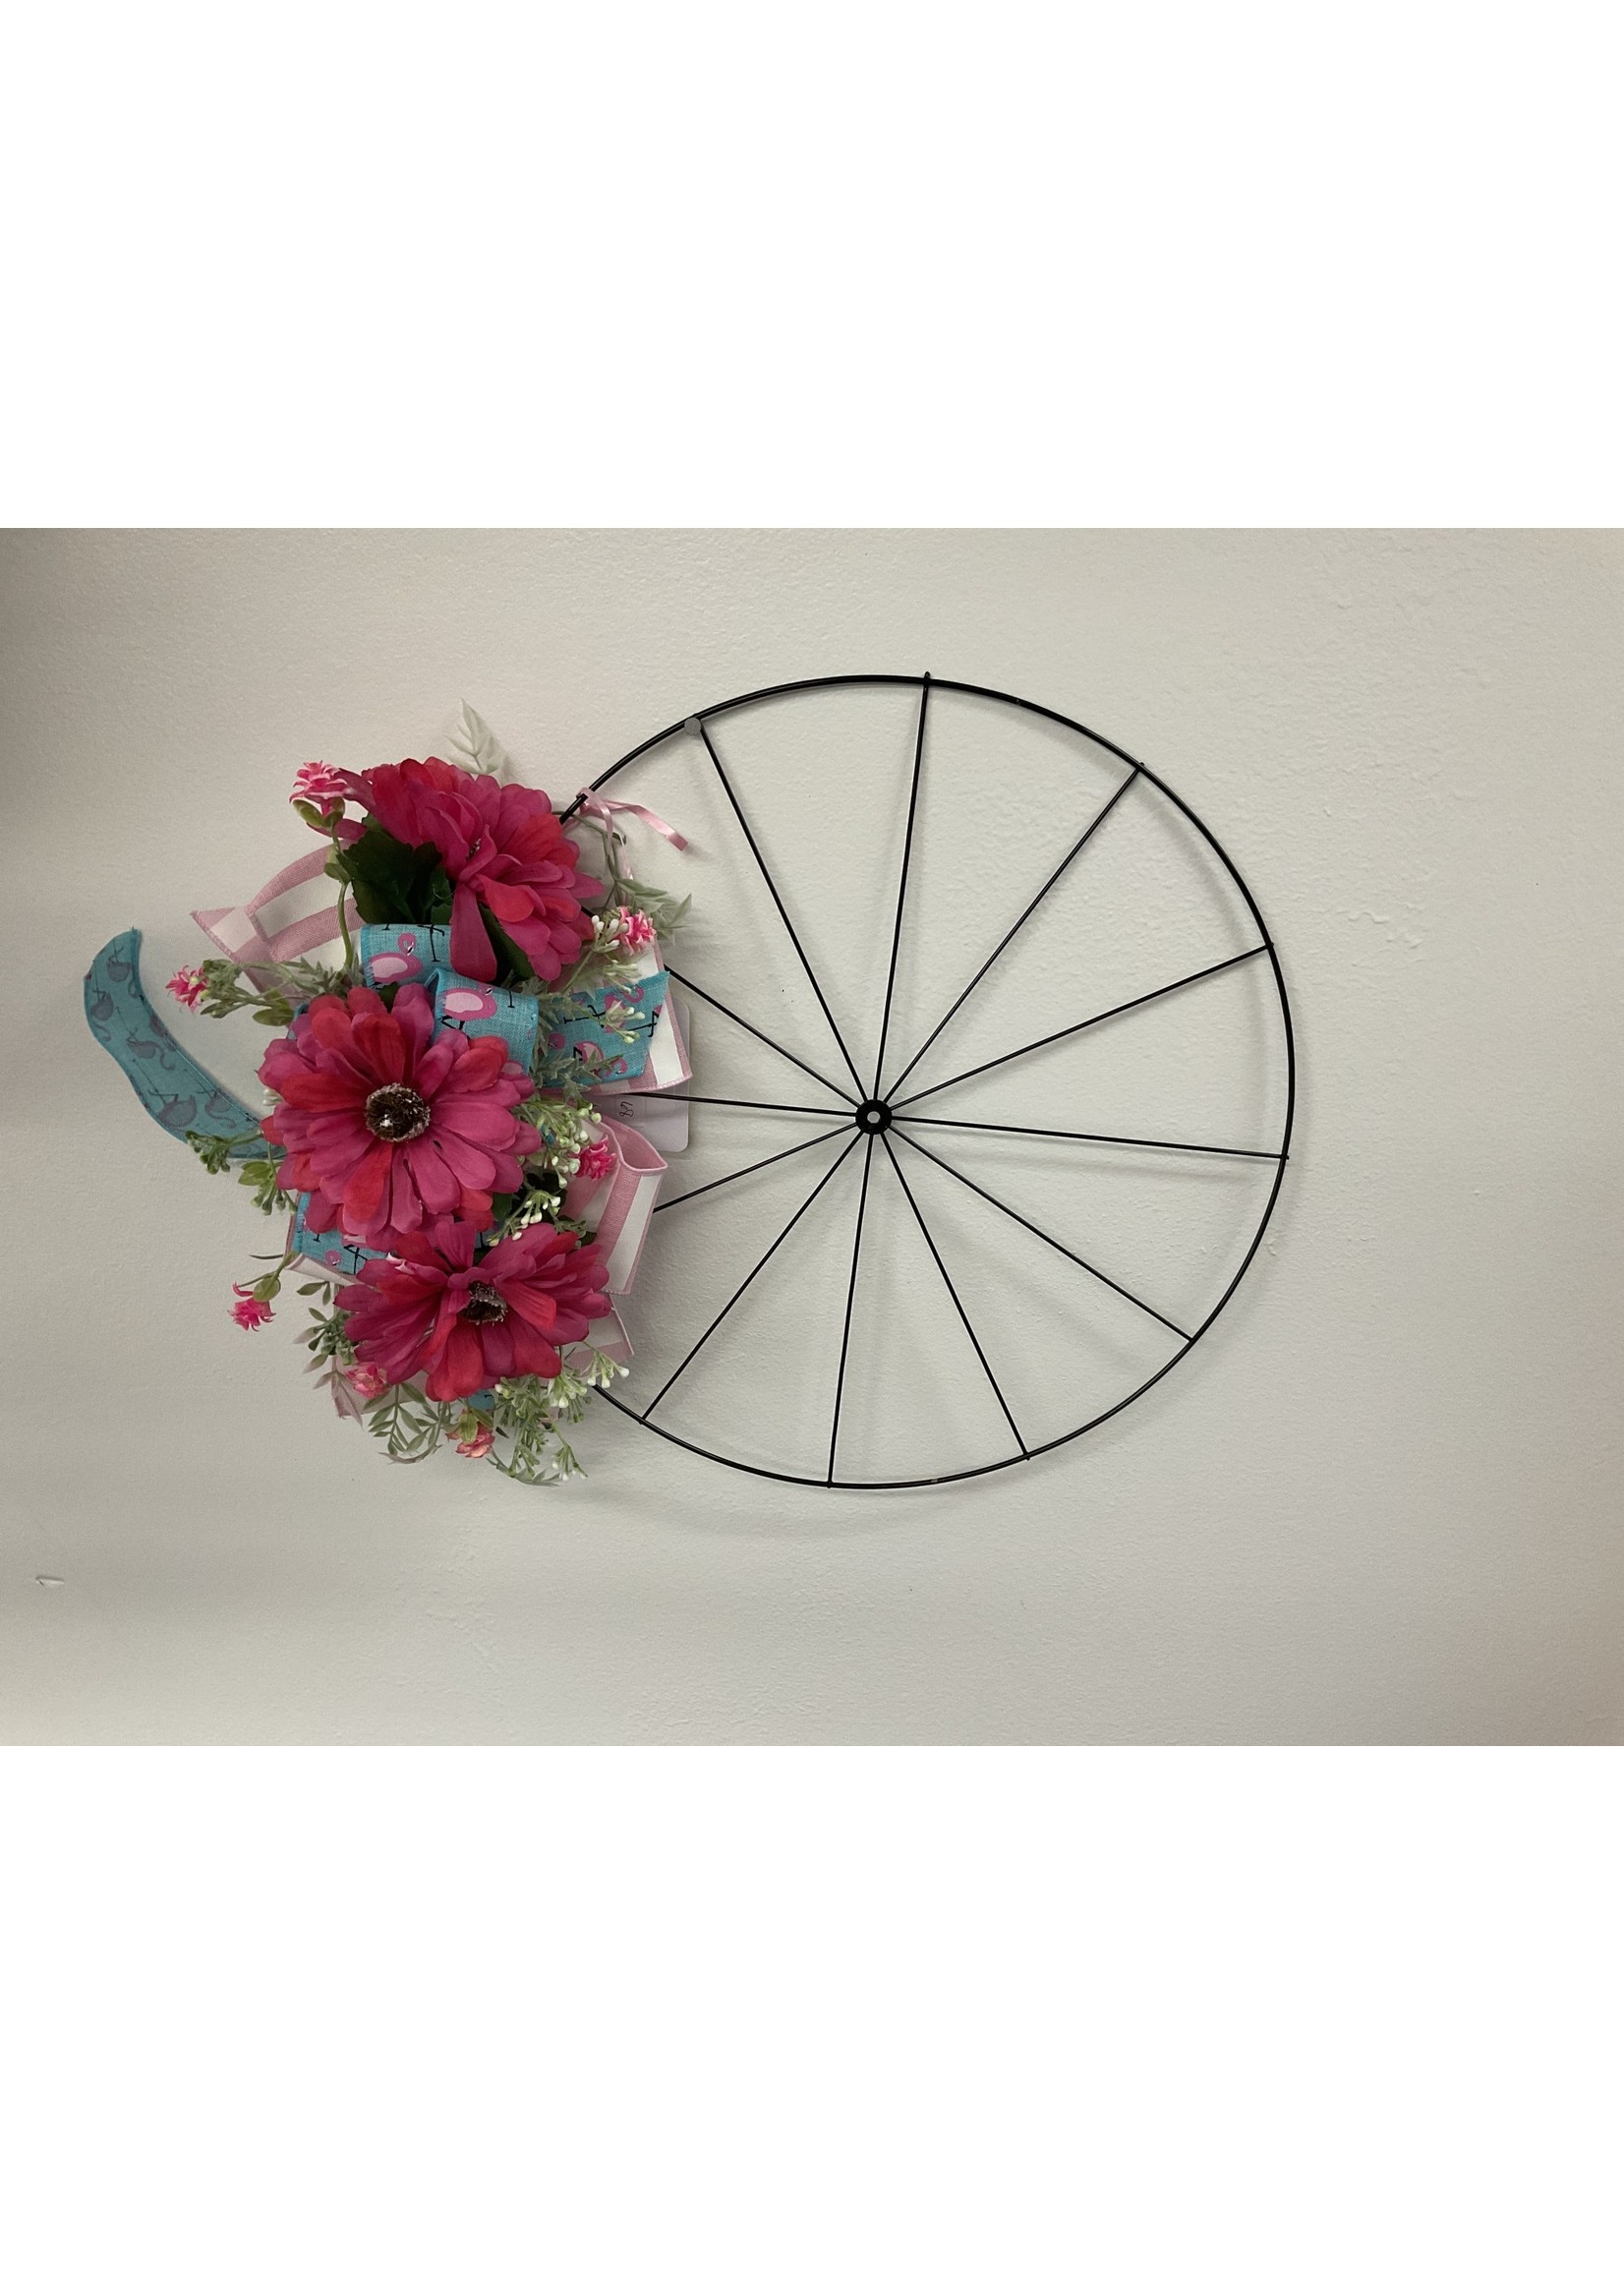 My New Favorite Thing Wreath Bicycle Pink Flowers with Pink Flamingo Ribbon